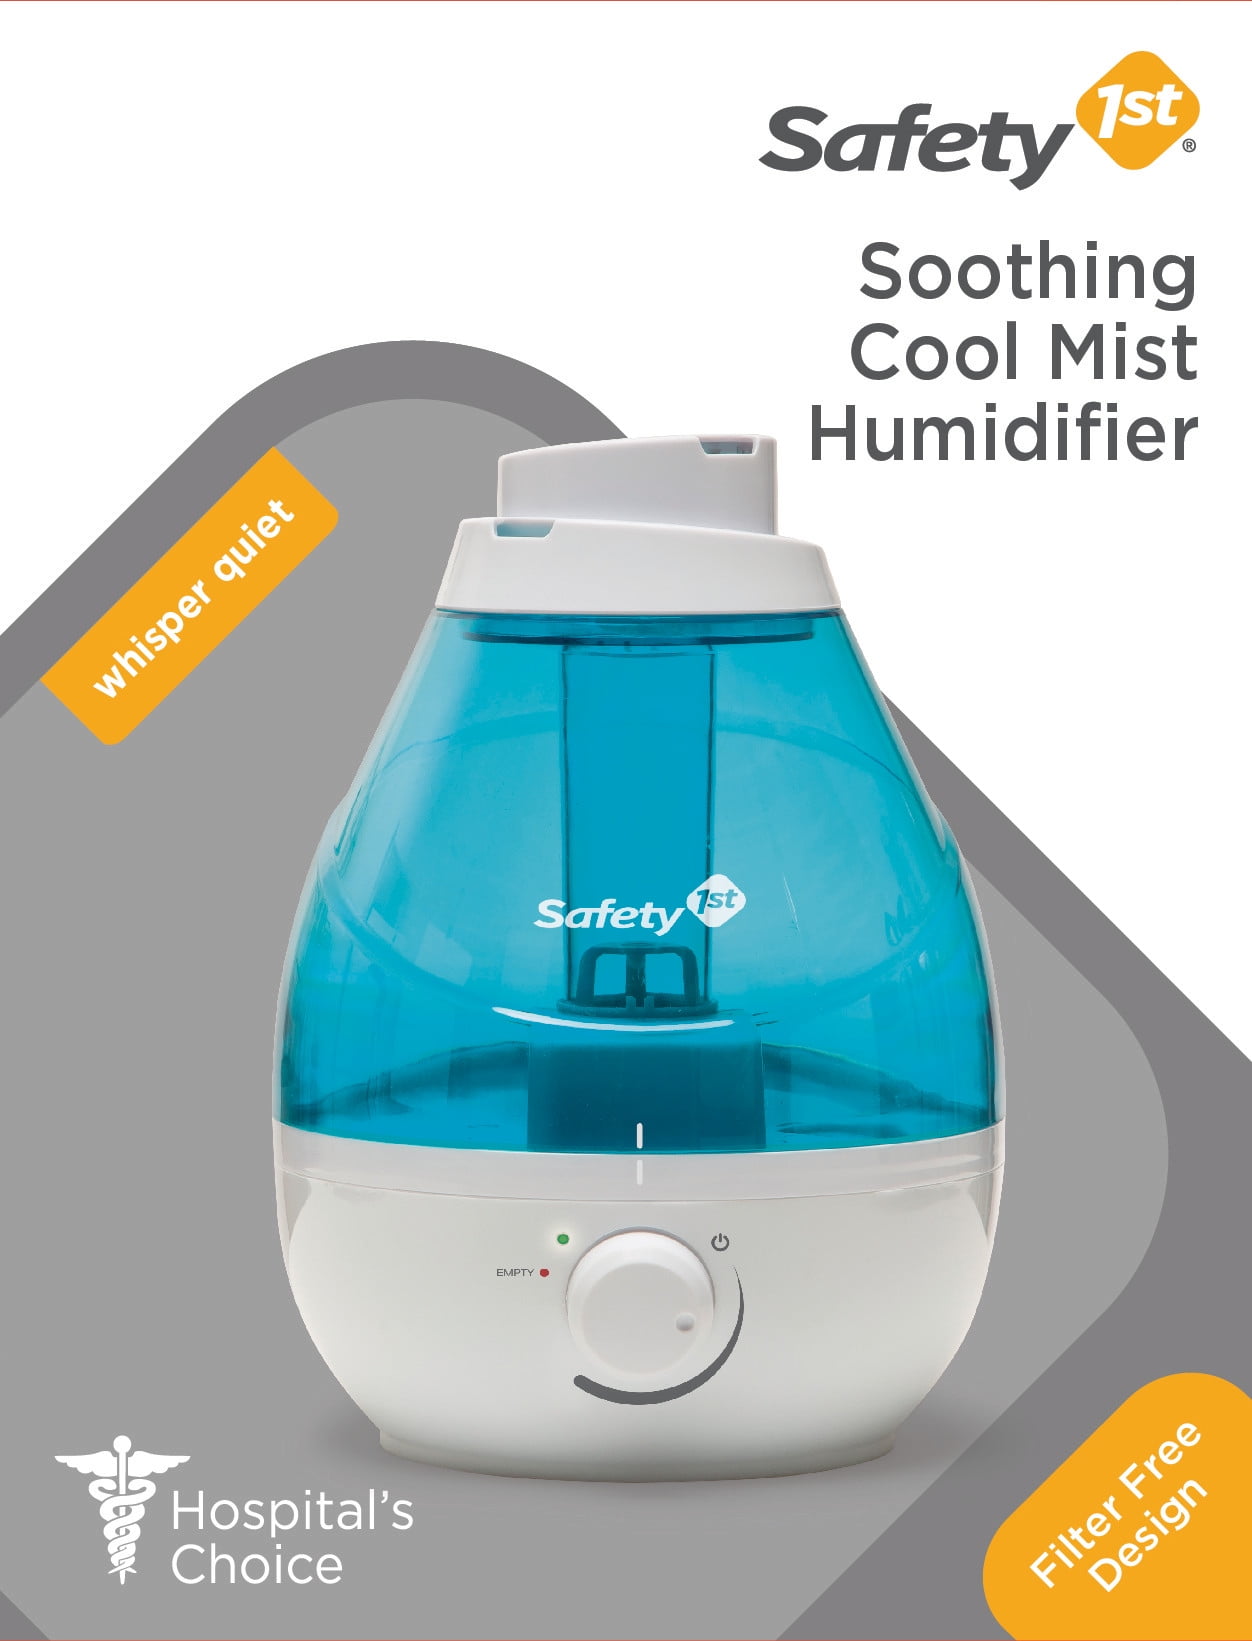 Safety 1st 360 cool mist ultrasonic humidifier instructions